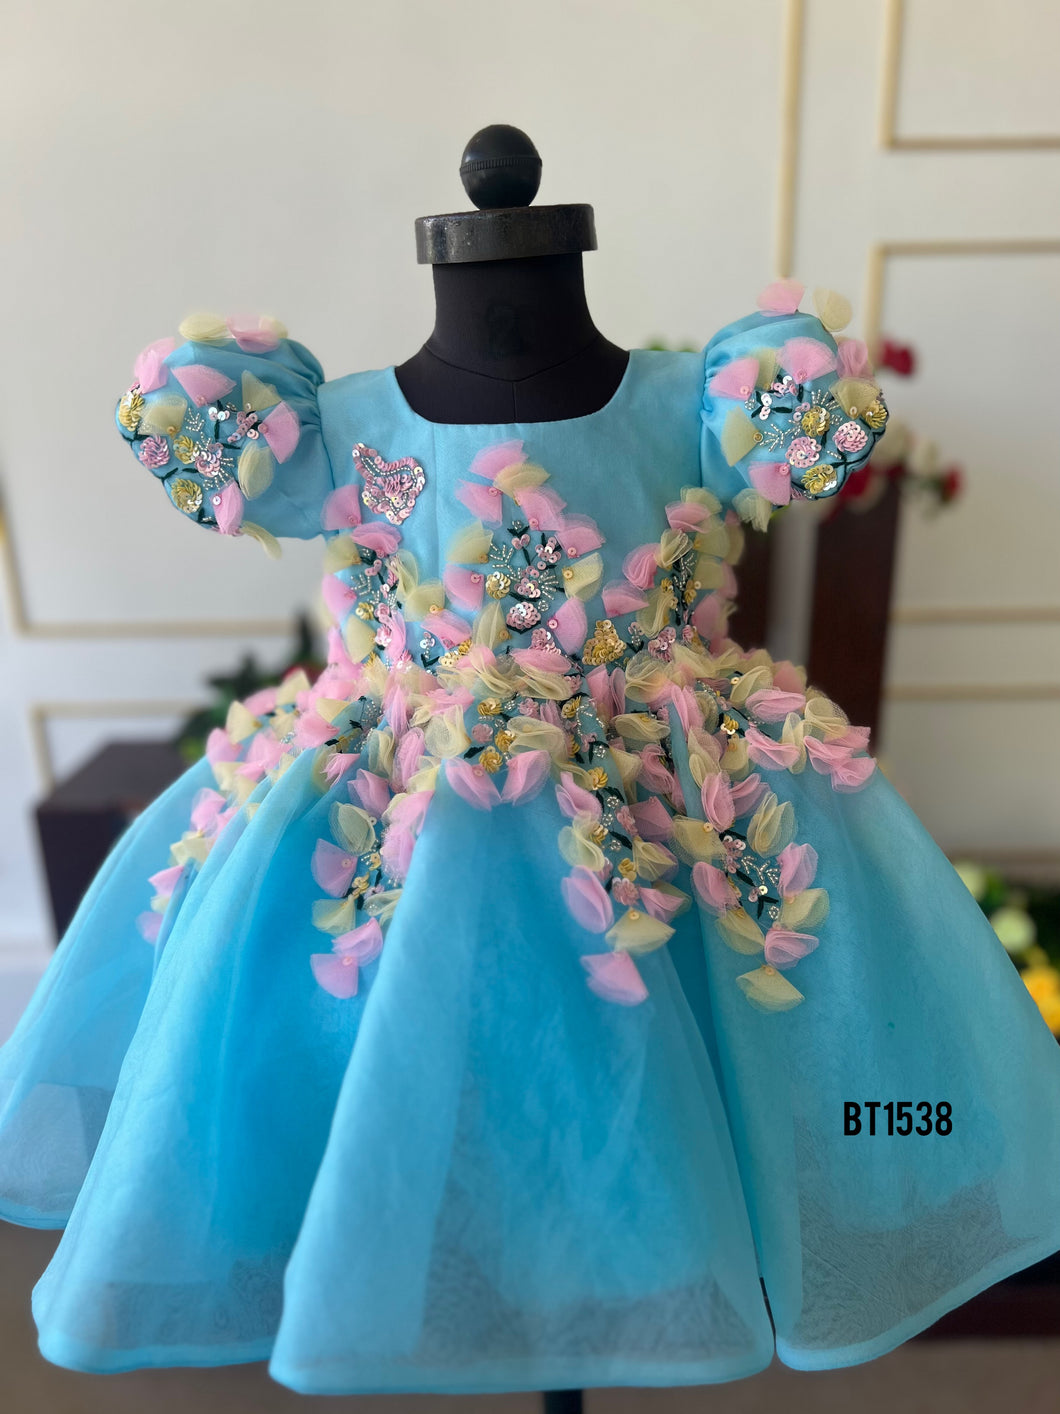 BT1538 Whimsical Blossom Fairytale Dress - Enchanting Floral Party Attire